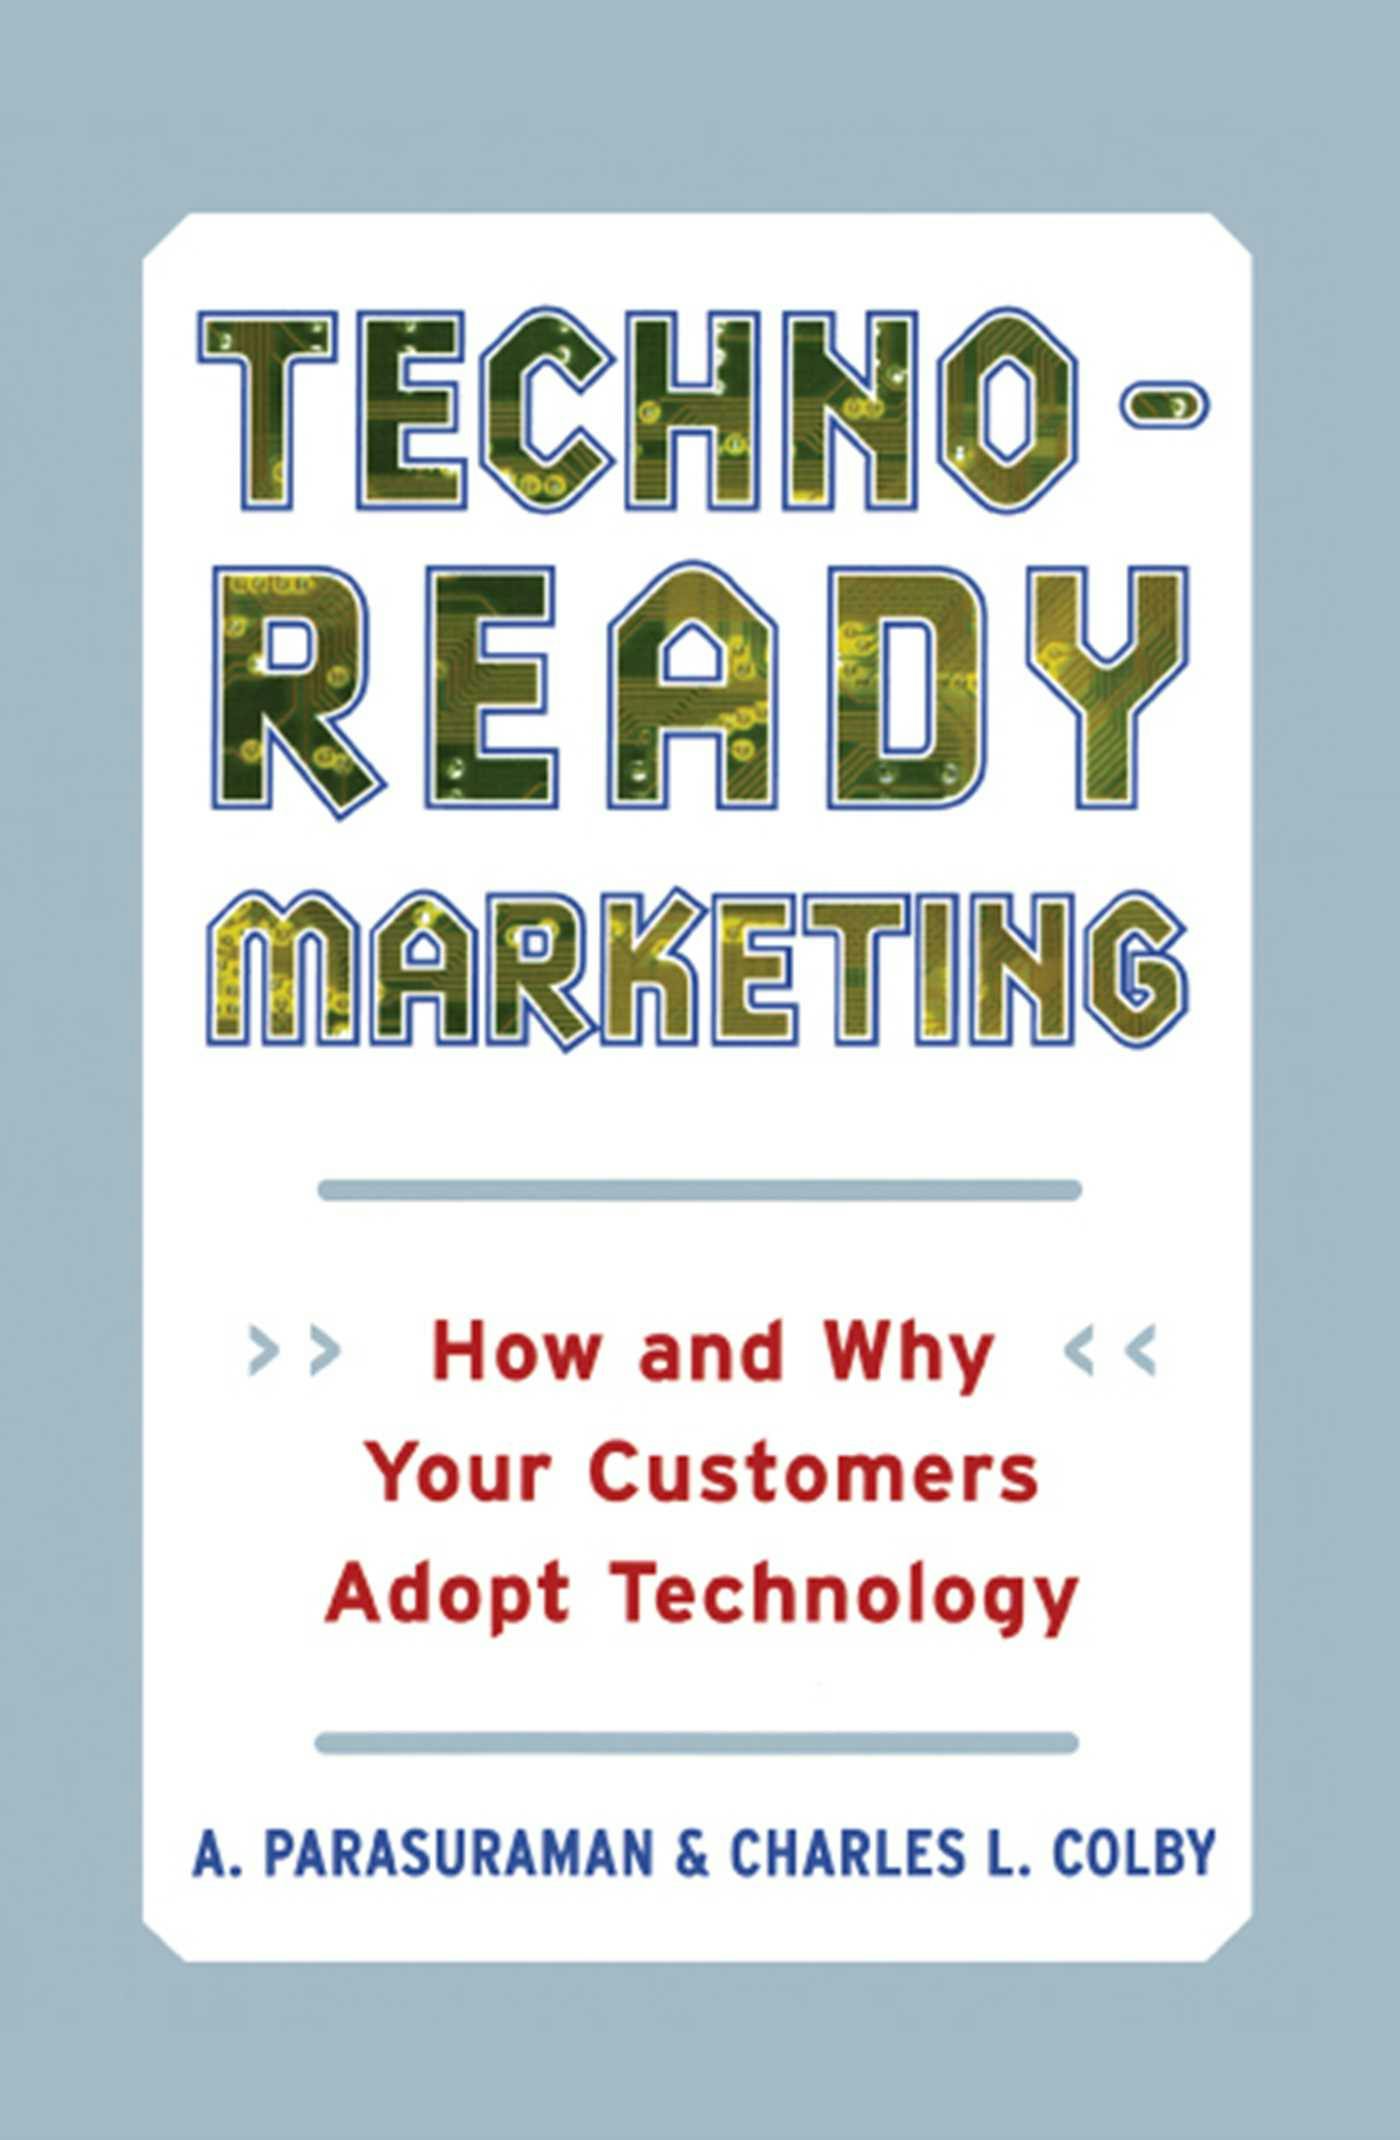 Techno-Ready Marketing: How and Why Customers Adopt Technology - Charles L. Colby, A. Parasuraman